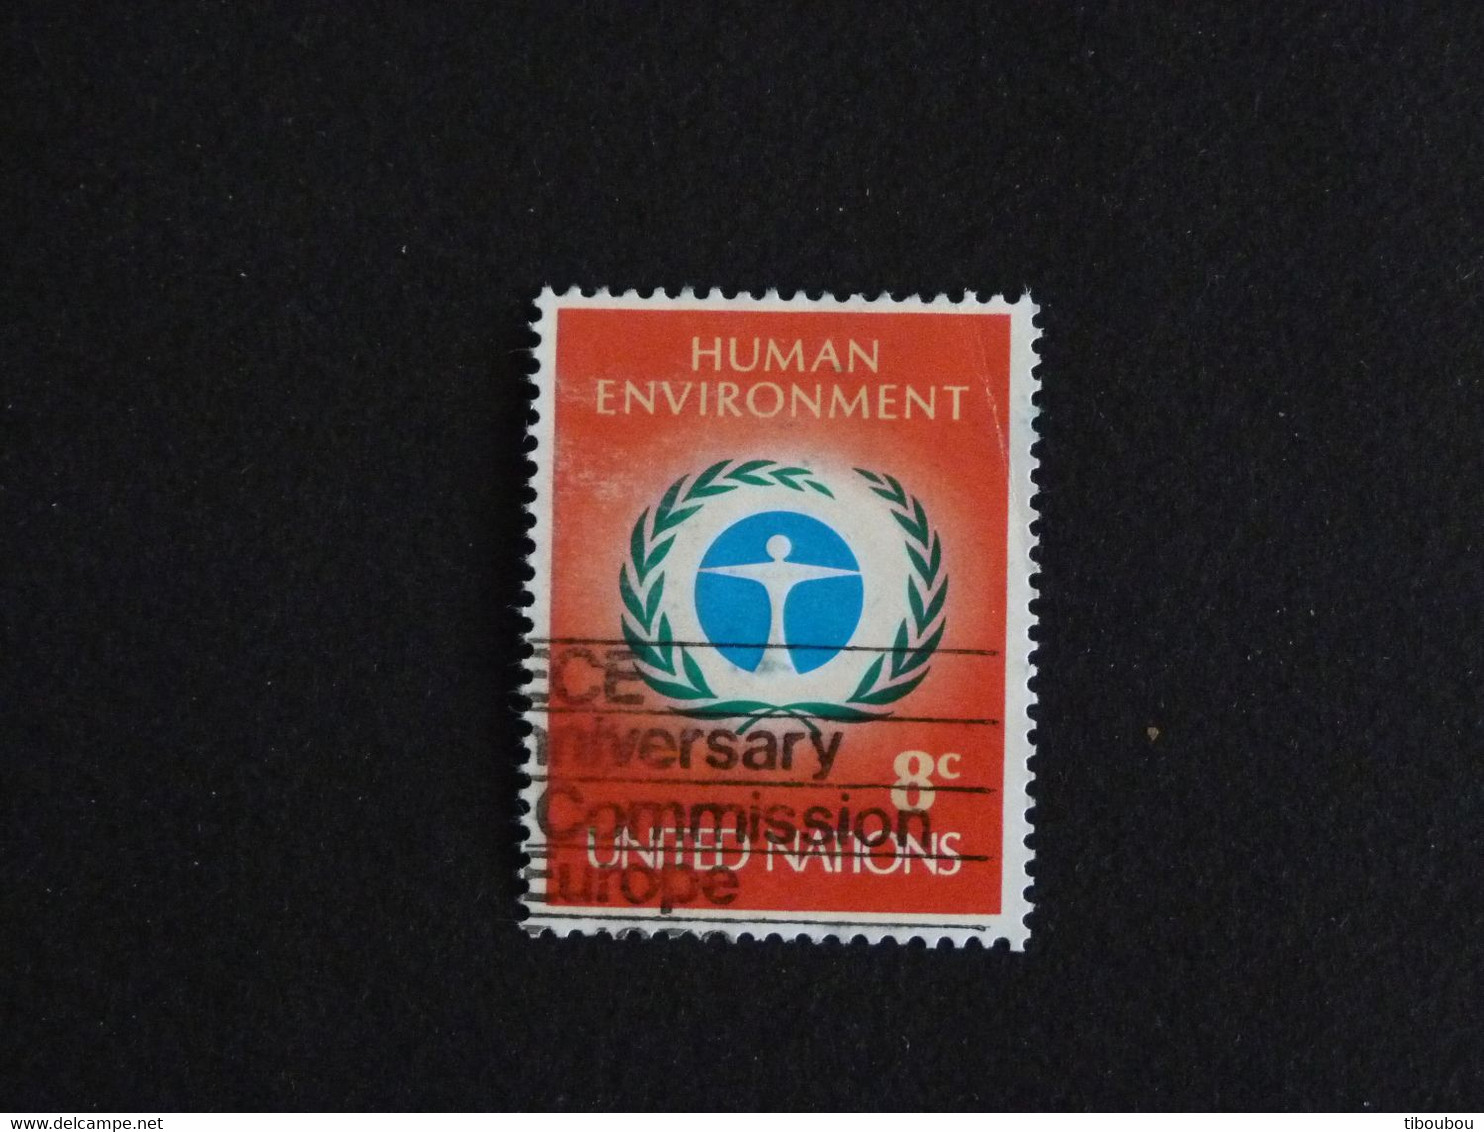 NATIONS UNIES UNITED NATIONS ONU NEW YORK YT 222 OBLITERE - CONFERENCE SUR ENVIRONNEMENT - Used Stamps